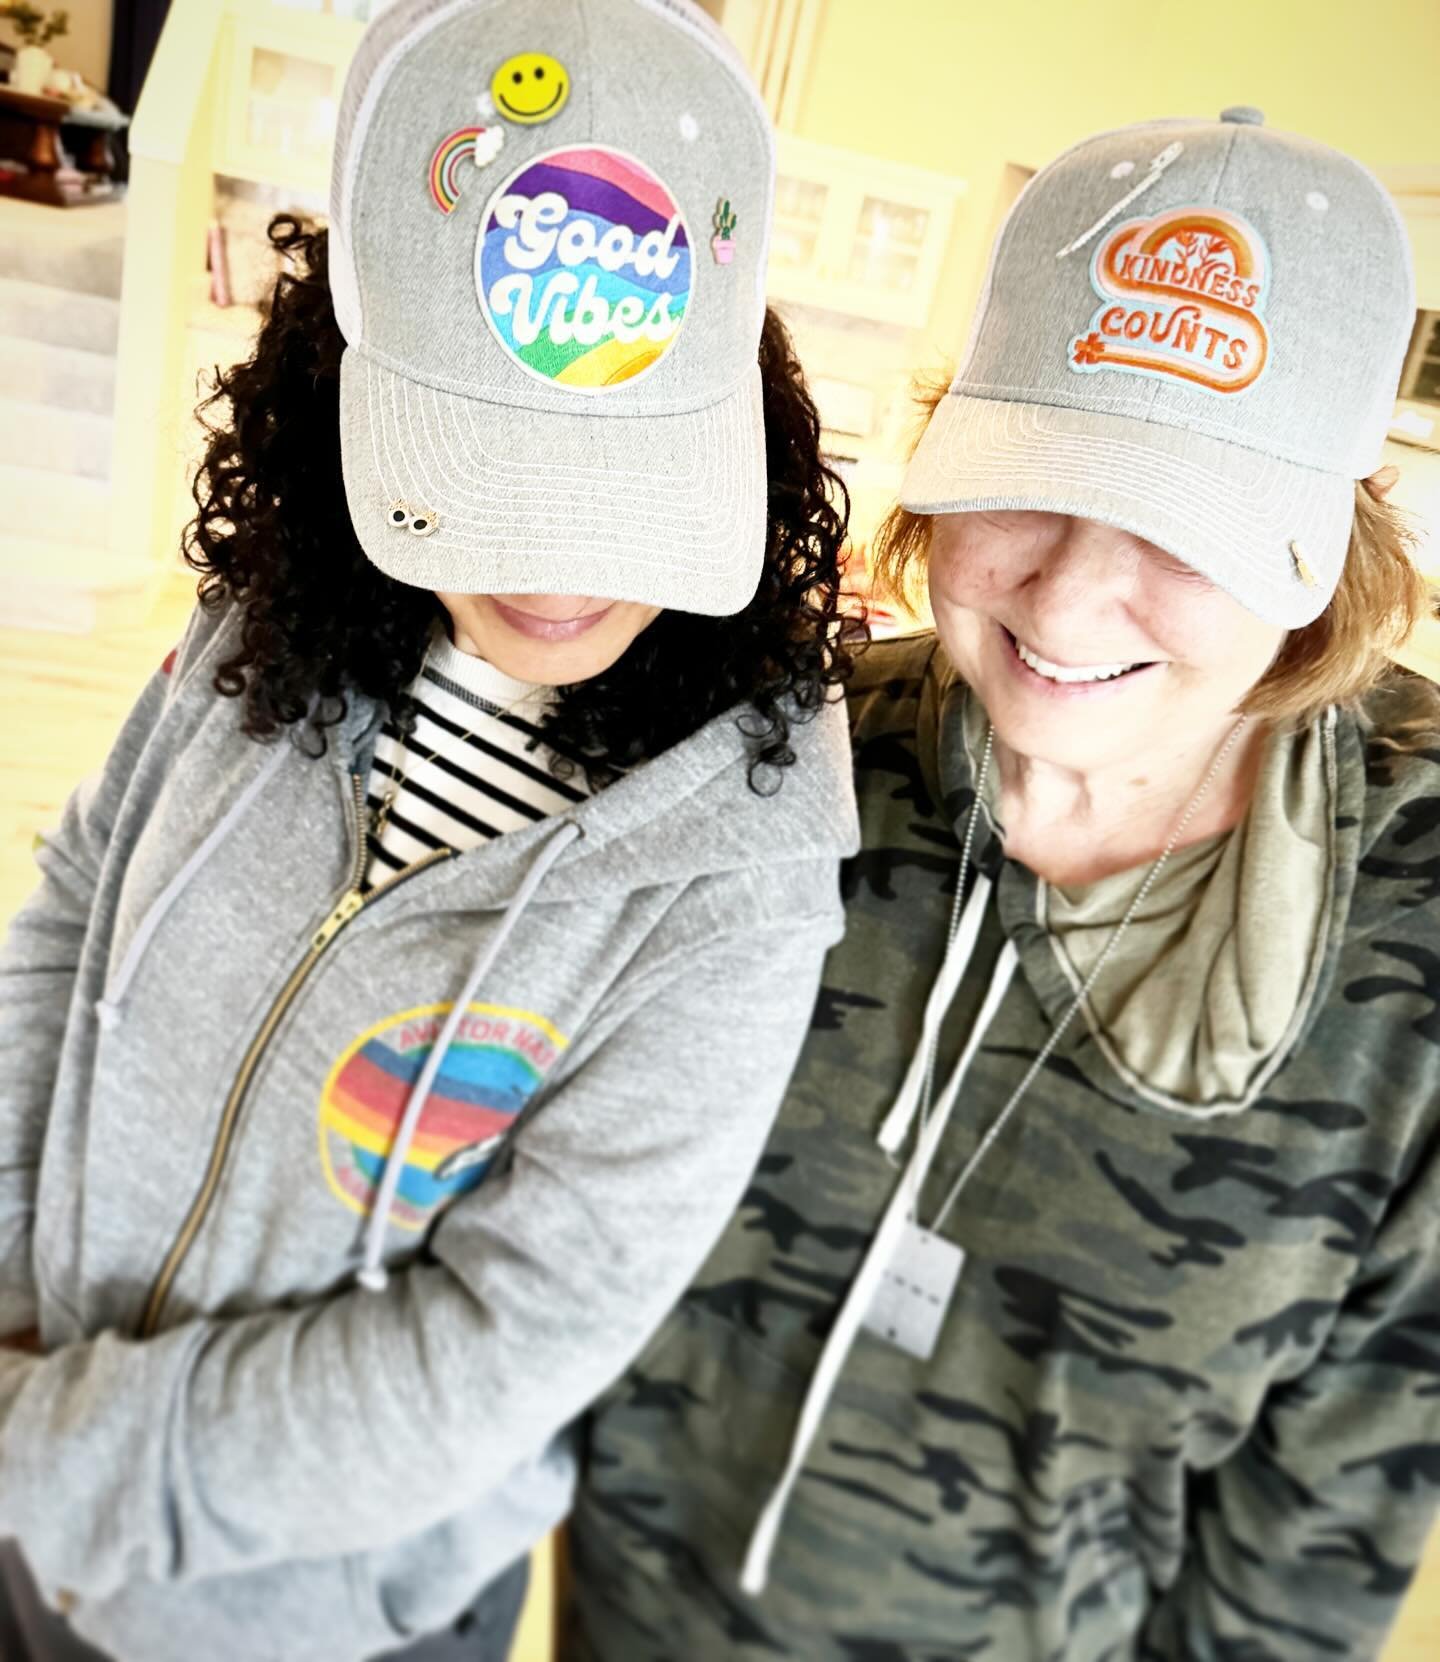 Good Vibes and Kindness Counts are great messages! They found their matches. And the pins all have personal meanings to our hat makers ❤️🧢👏

#hatbar #customhats #truckerhatbarexperience #truckerhatbar #minneapolis #mnmade #mnsmallbusiness #mnmom #m